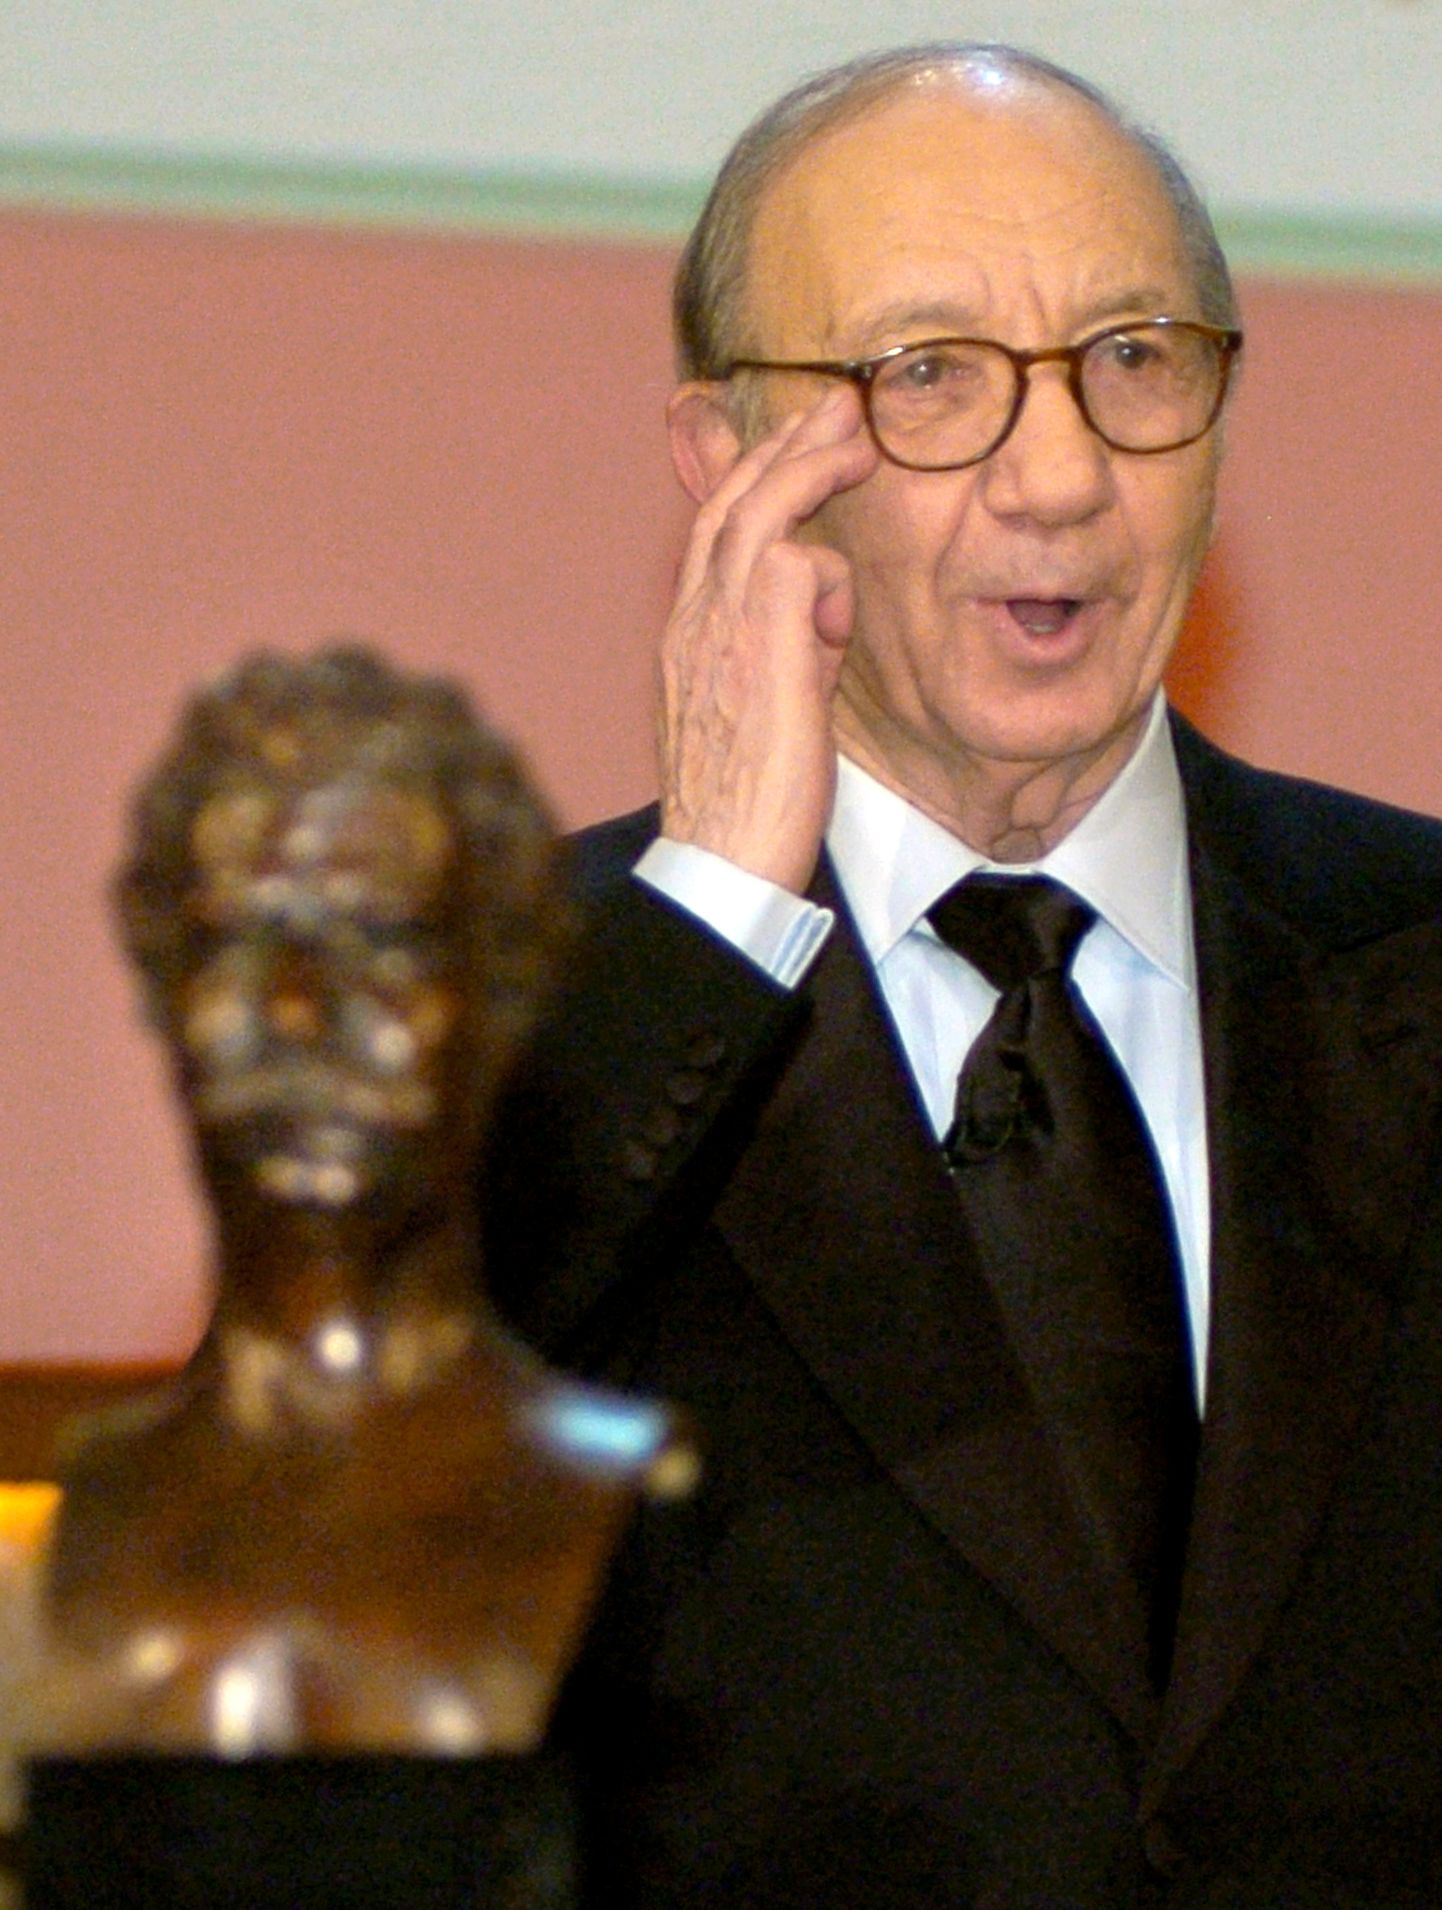 FILE PHOTO: Playwright Neil Simon is honored with the 2006 Mark Twain Prize at the end of a program showcasing his work at the Kennedy Center in Washington, October 15, 2006.  REUTERS/Mike Theiler/File Photo